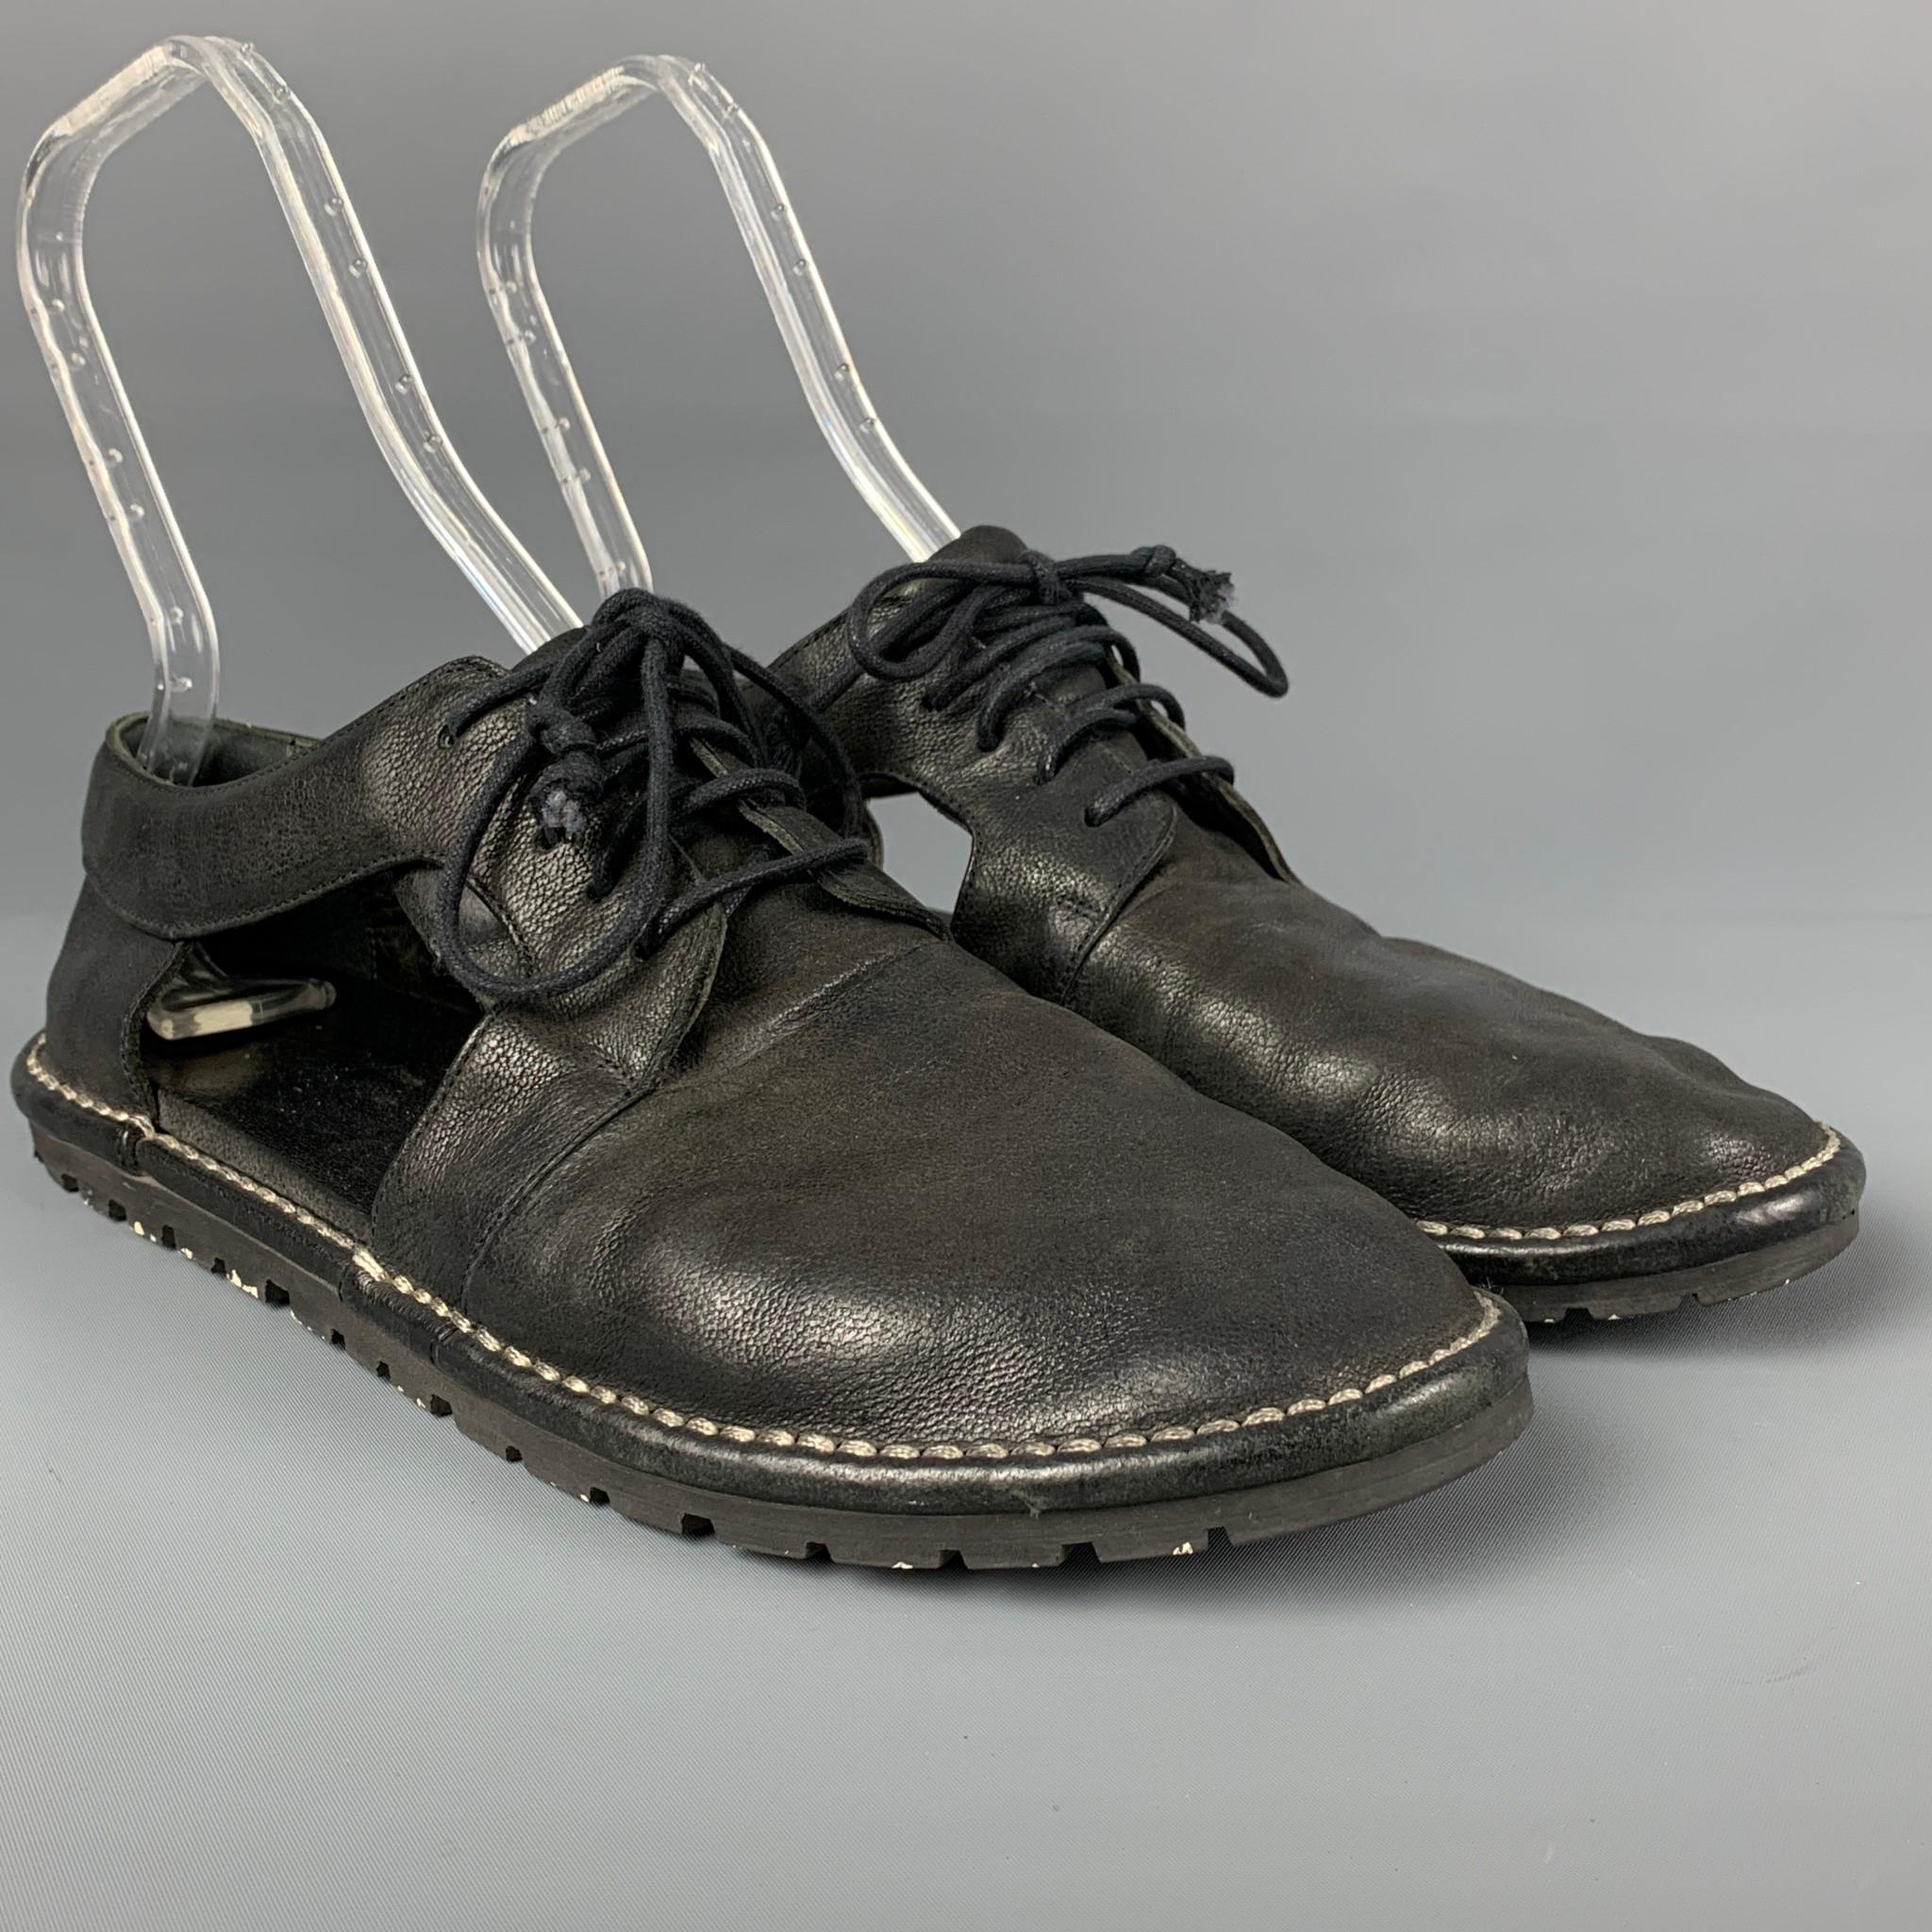 MARSELL shoes comes in a black leather featuring cutout designs, contrast stitching, and a lace up closure. 

Good Pre-Owned Condition.
Marked: 43

Outsole: 12.25 in. x 4.5 in. 